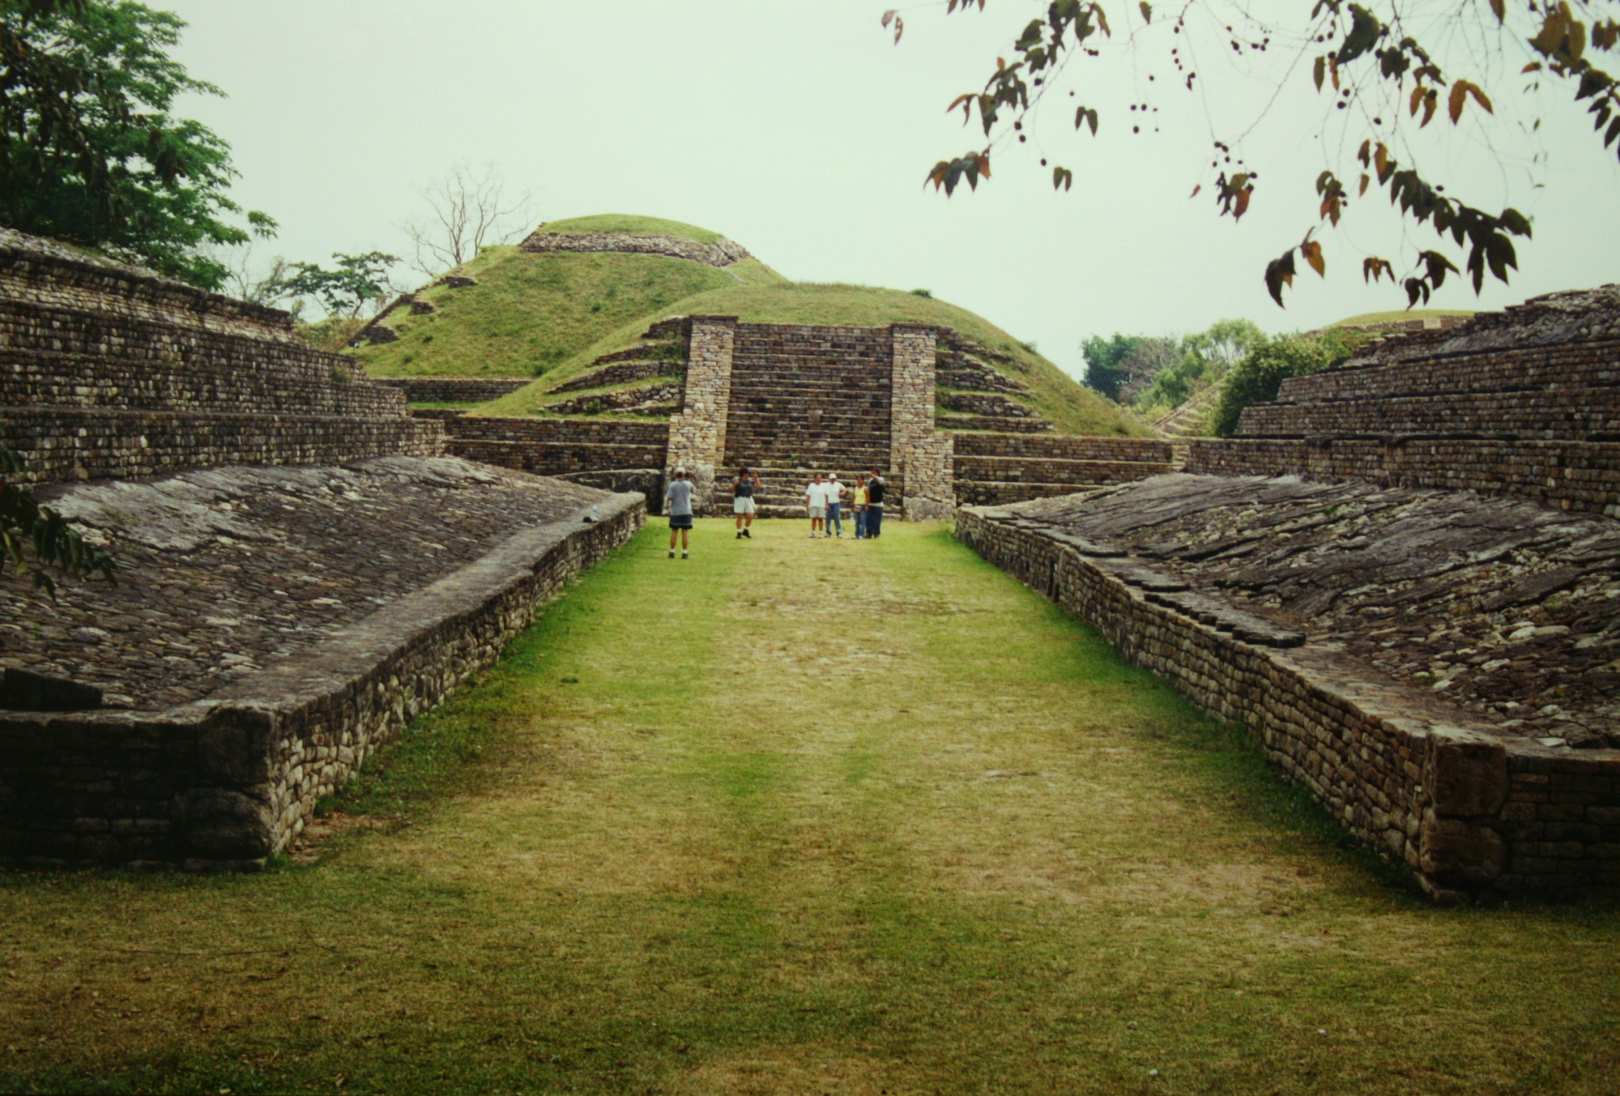 El Tajín: The lost city of the "Thunder" and a mysterious people 3